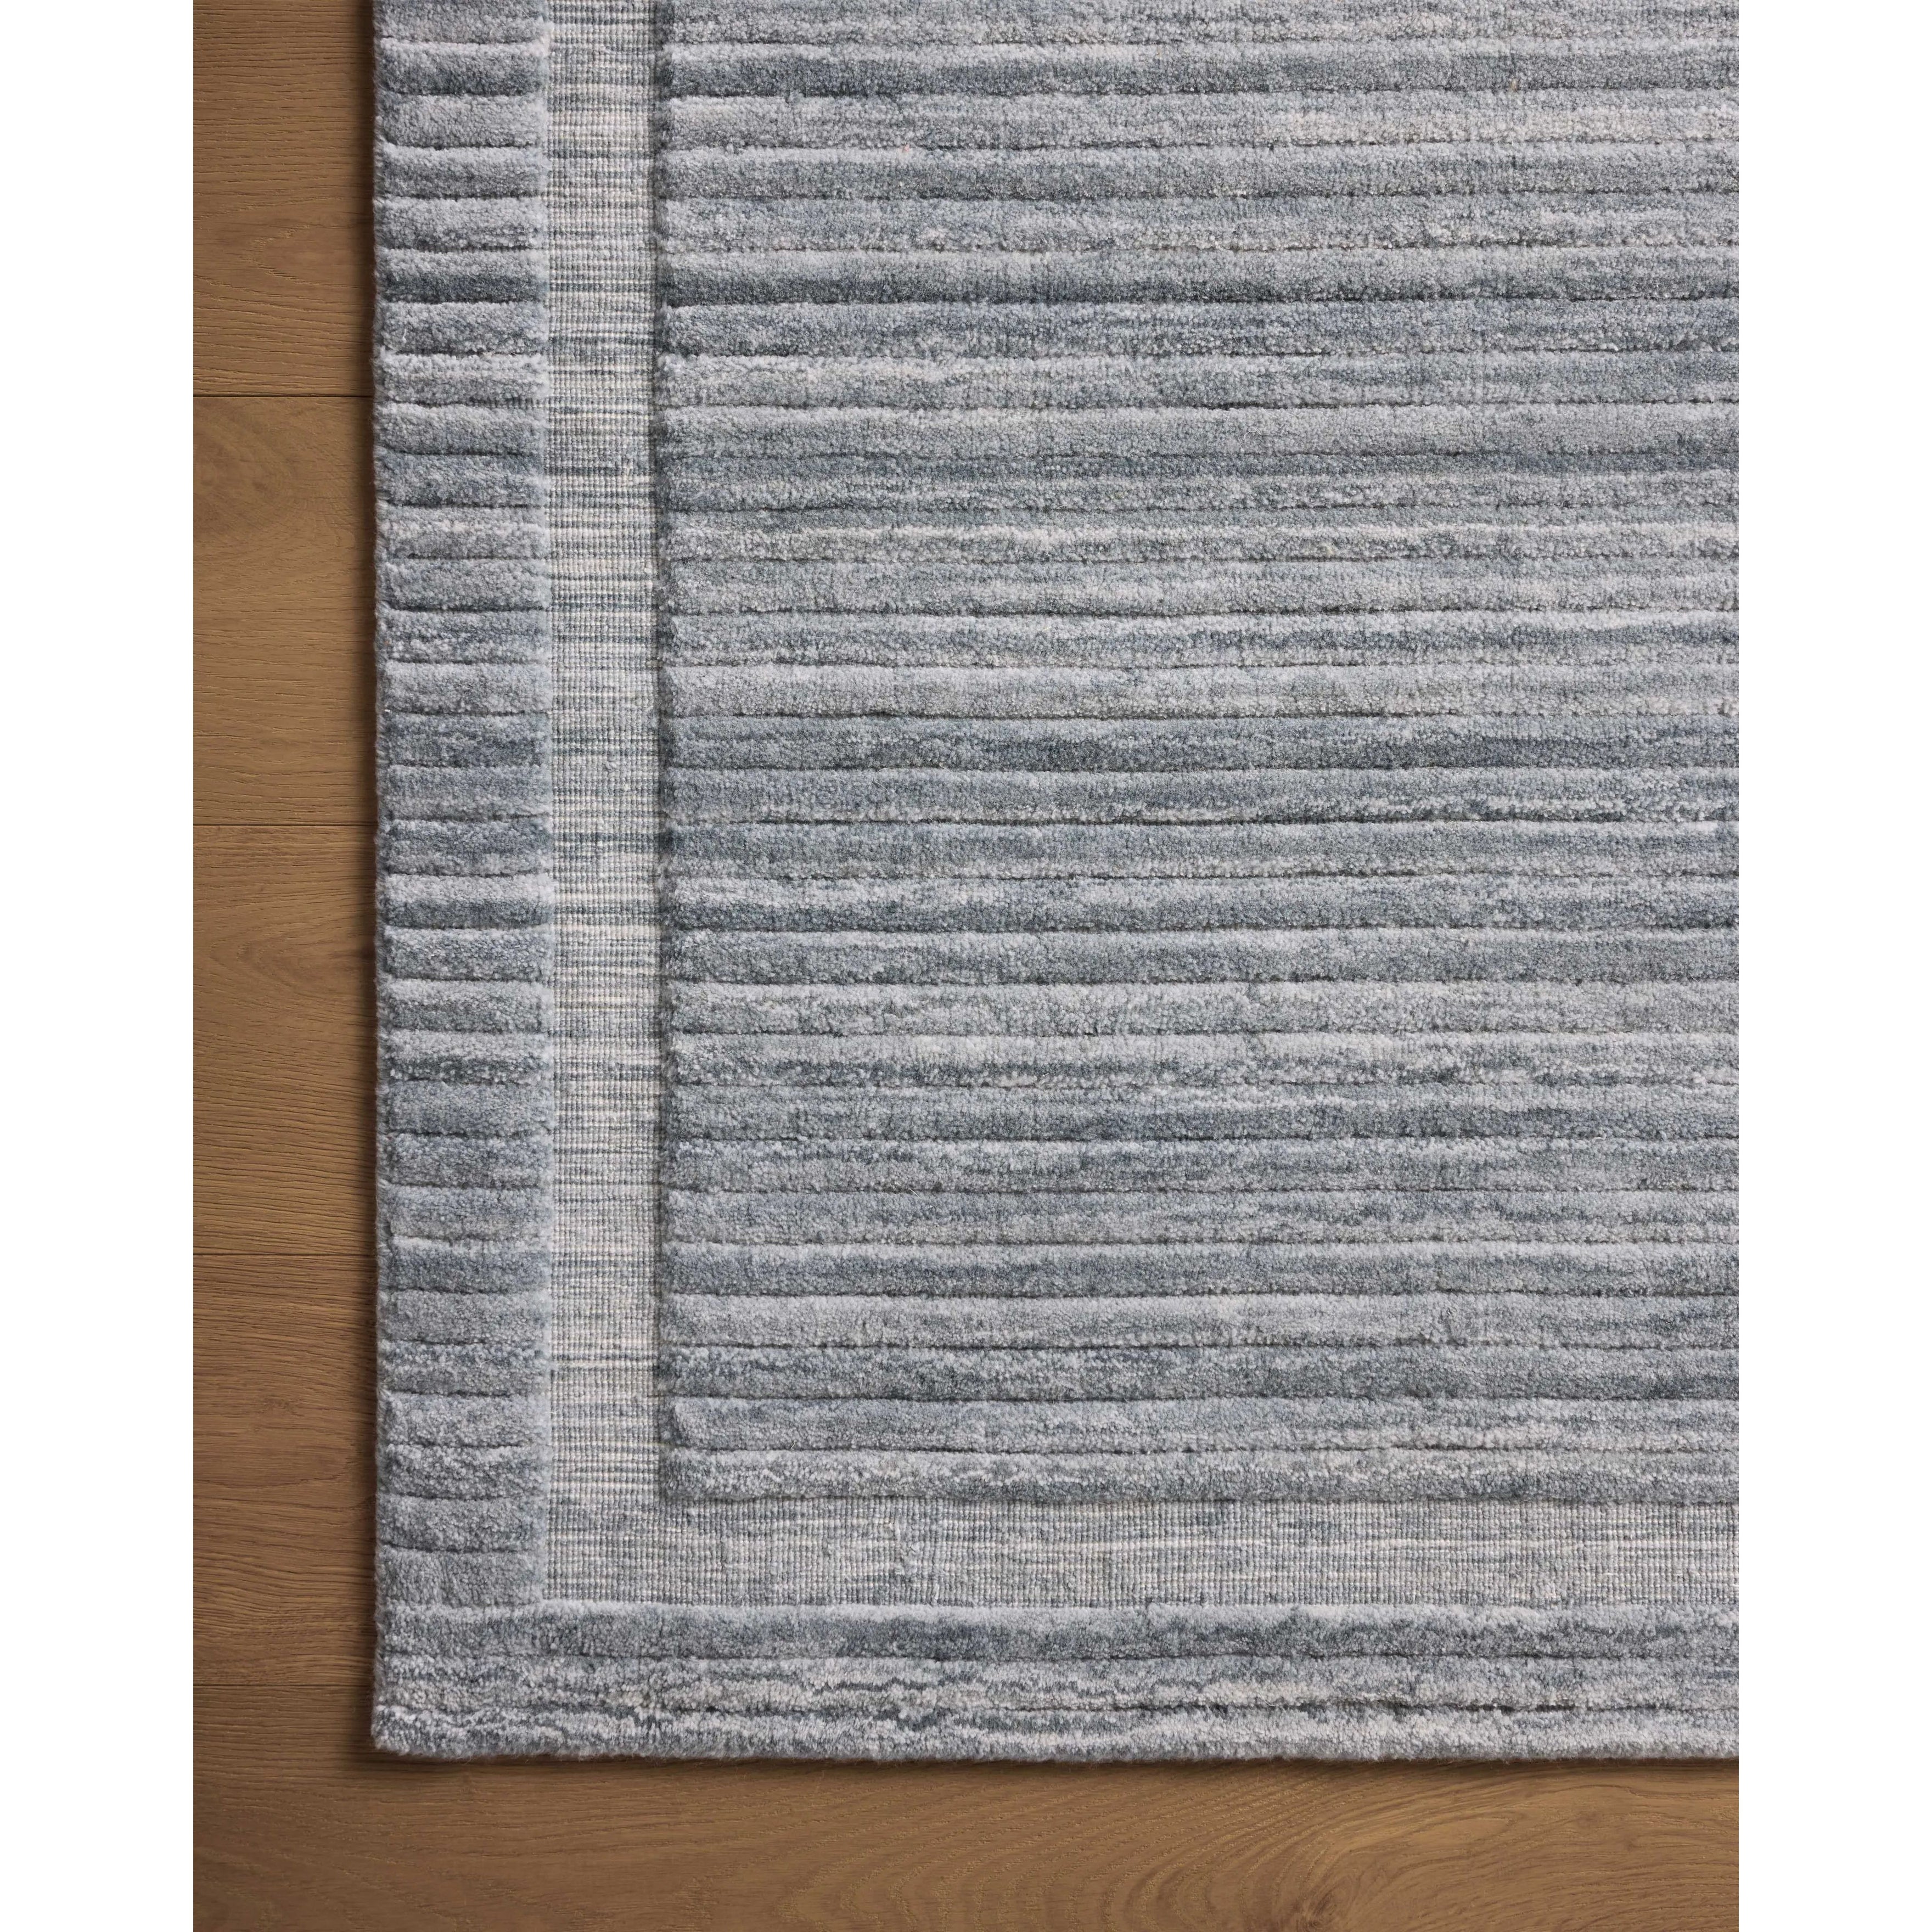 Irresistible to walk upon, the Dana Denim Rug by Brigette Romanek x Loloi has a high-low texture that alternates between a subtly shaggy pile and a soft base. Horizontal broken stripes give the area rug a fresh and energized structure, while a finish of fringe along the edges accentuates its sense of movement. Amethyst Home provides interior design, new home construction design consulting, vintage area rugs, and lighting in the Des Moines metro area.